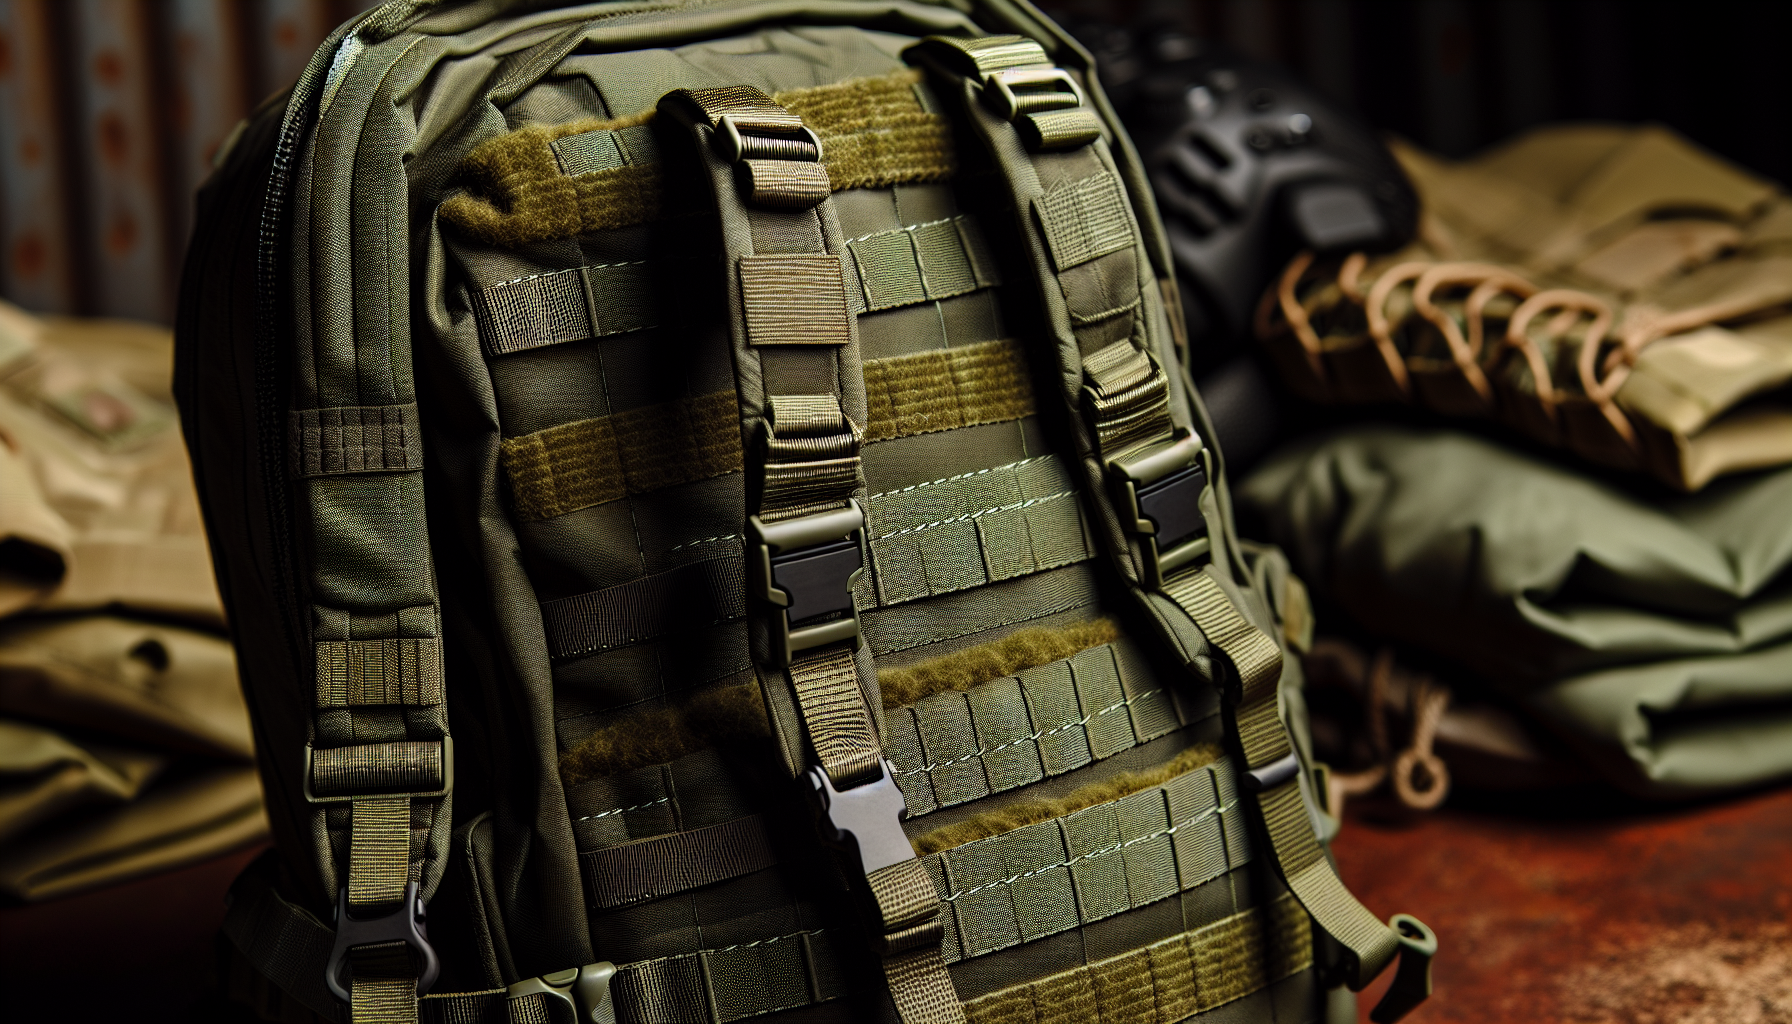 A rugged tactical backpack with molle webbing and padded shoulder straps